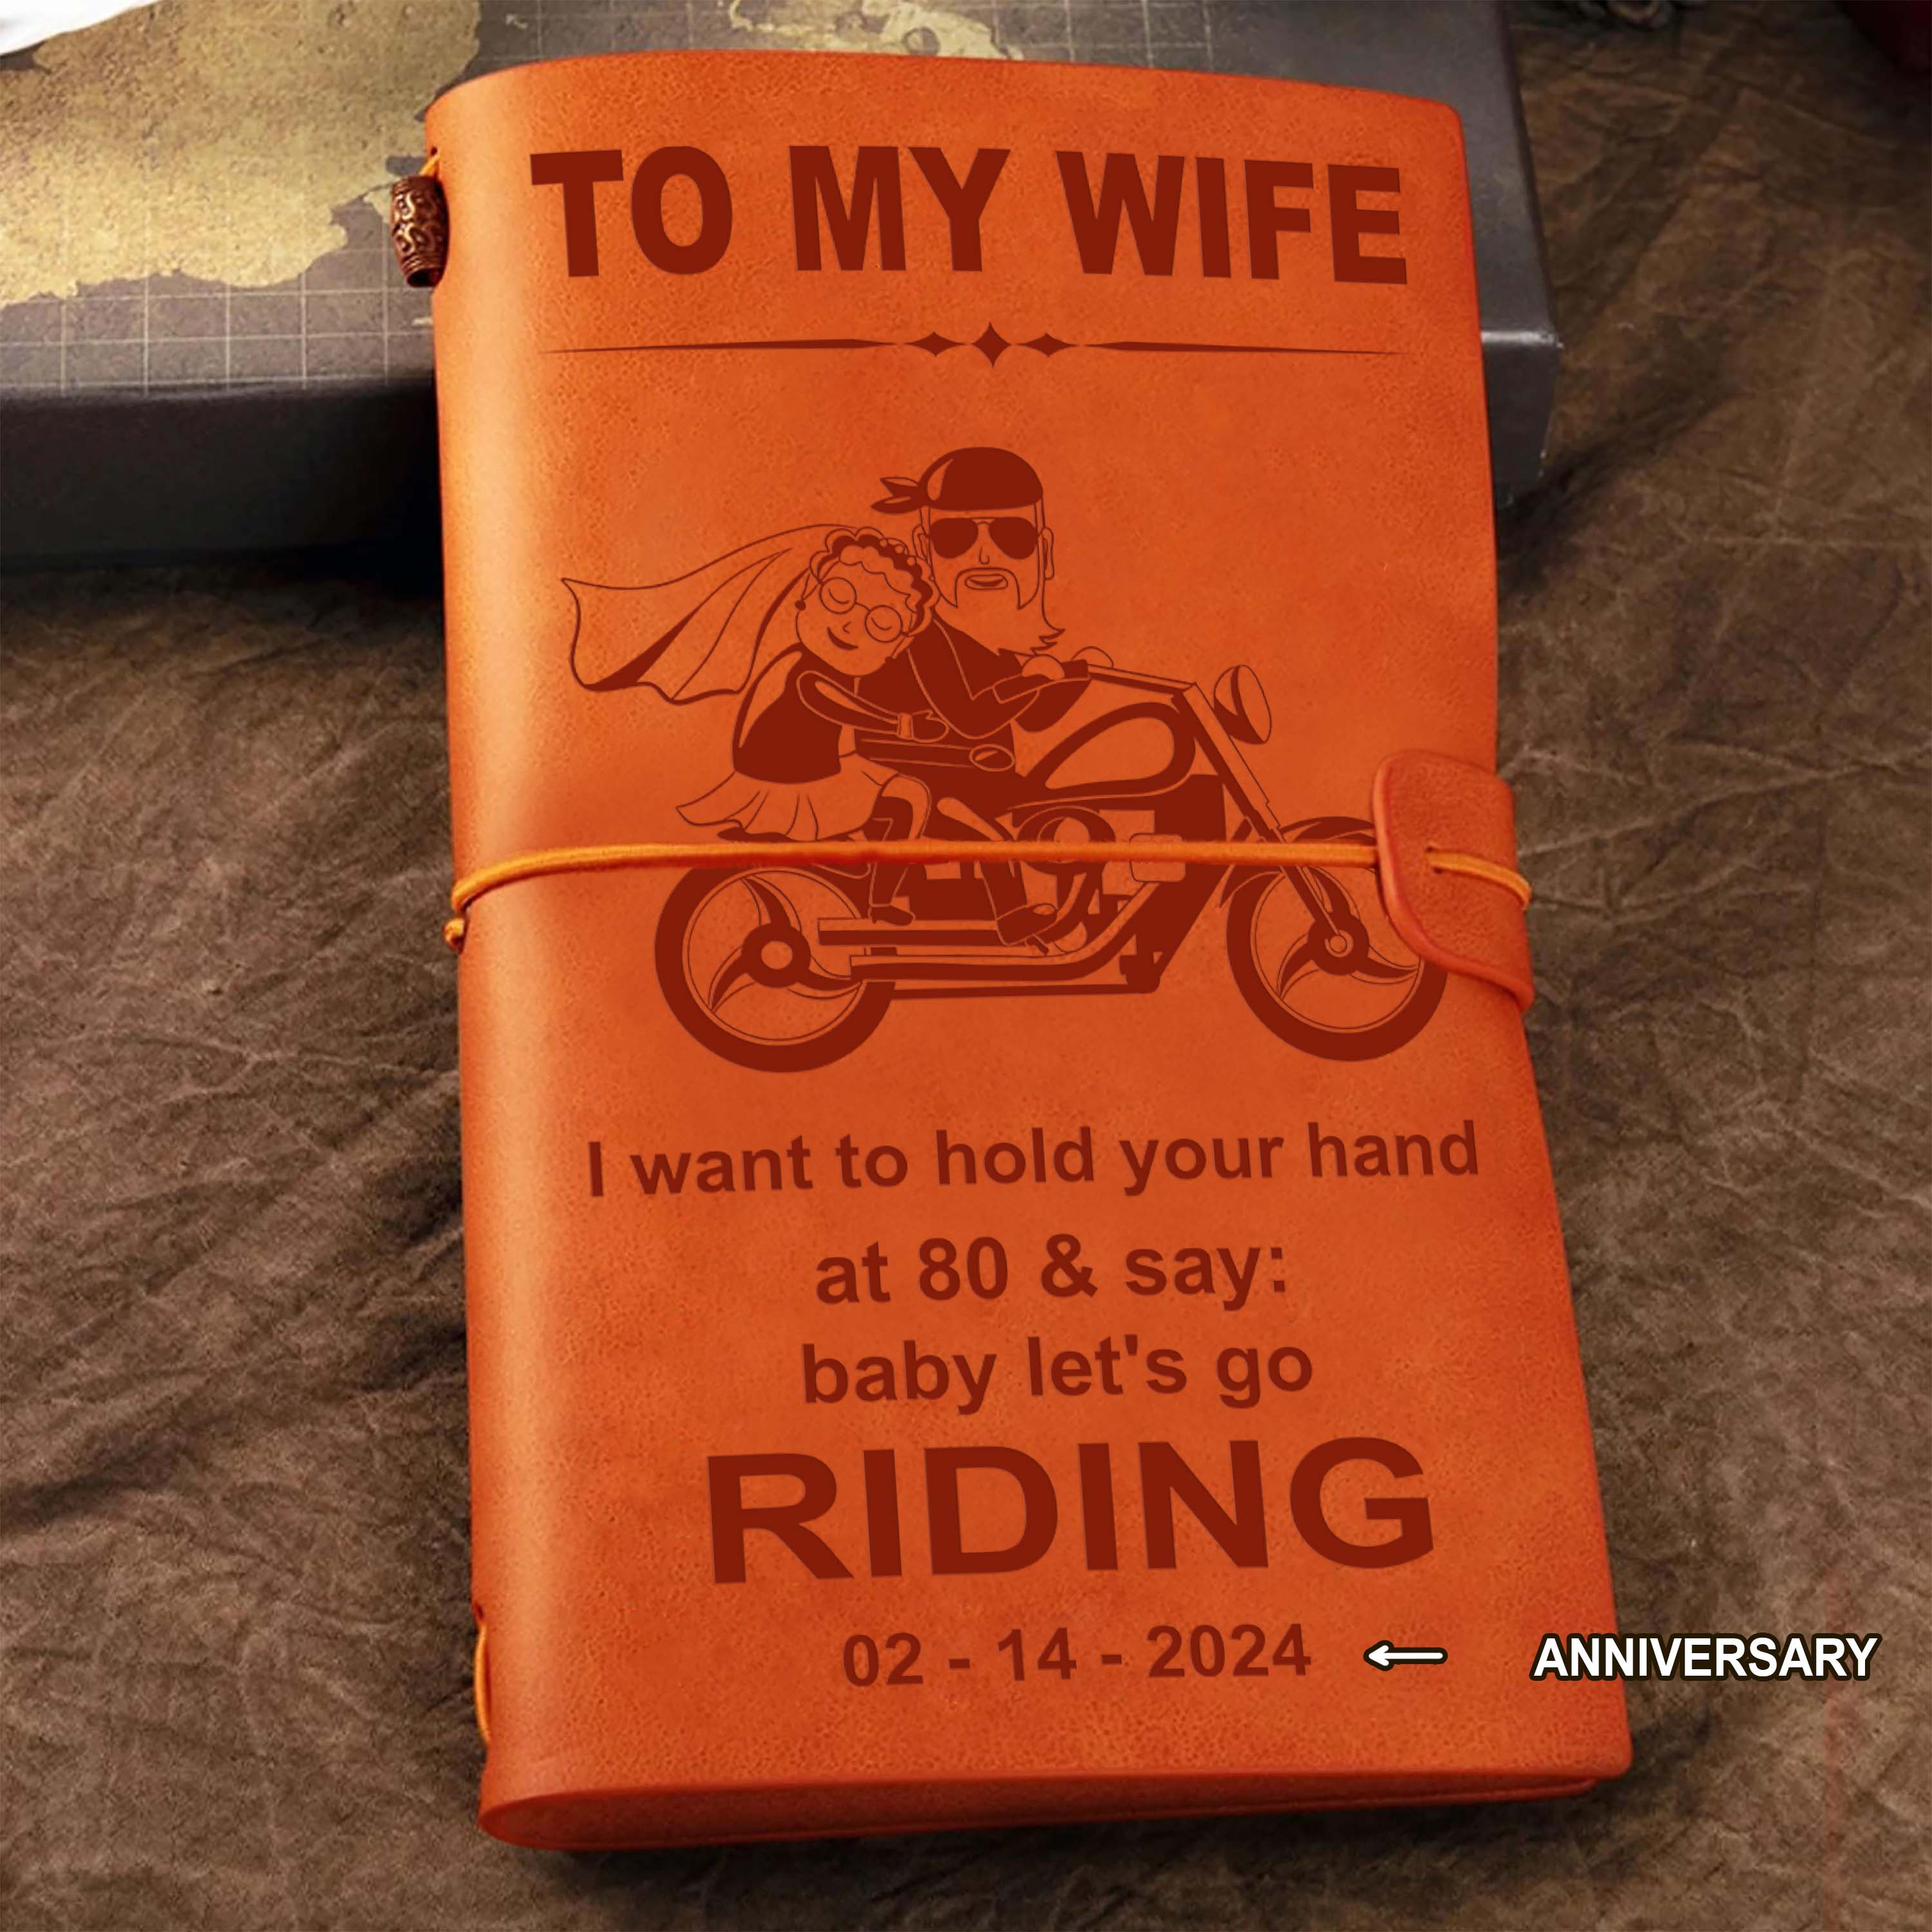 Valentines gifts-Biker Vintage Journal Husband to wife- I want to hold your hand at 80 & say: Baby let's go Riding